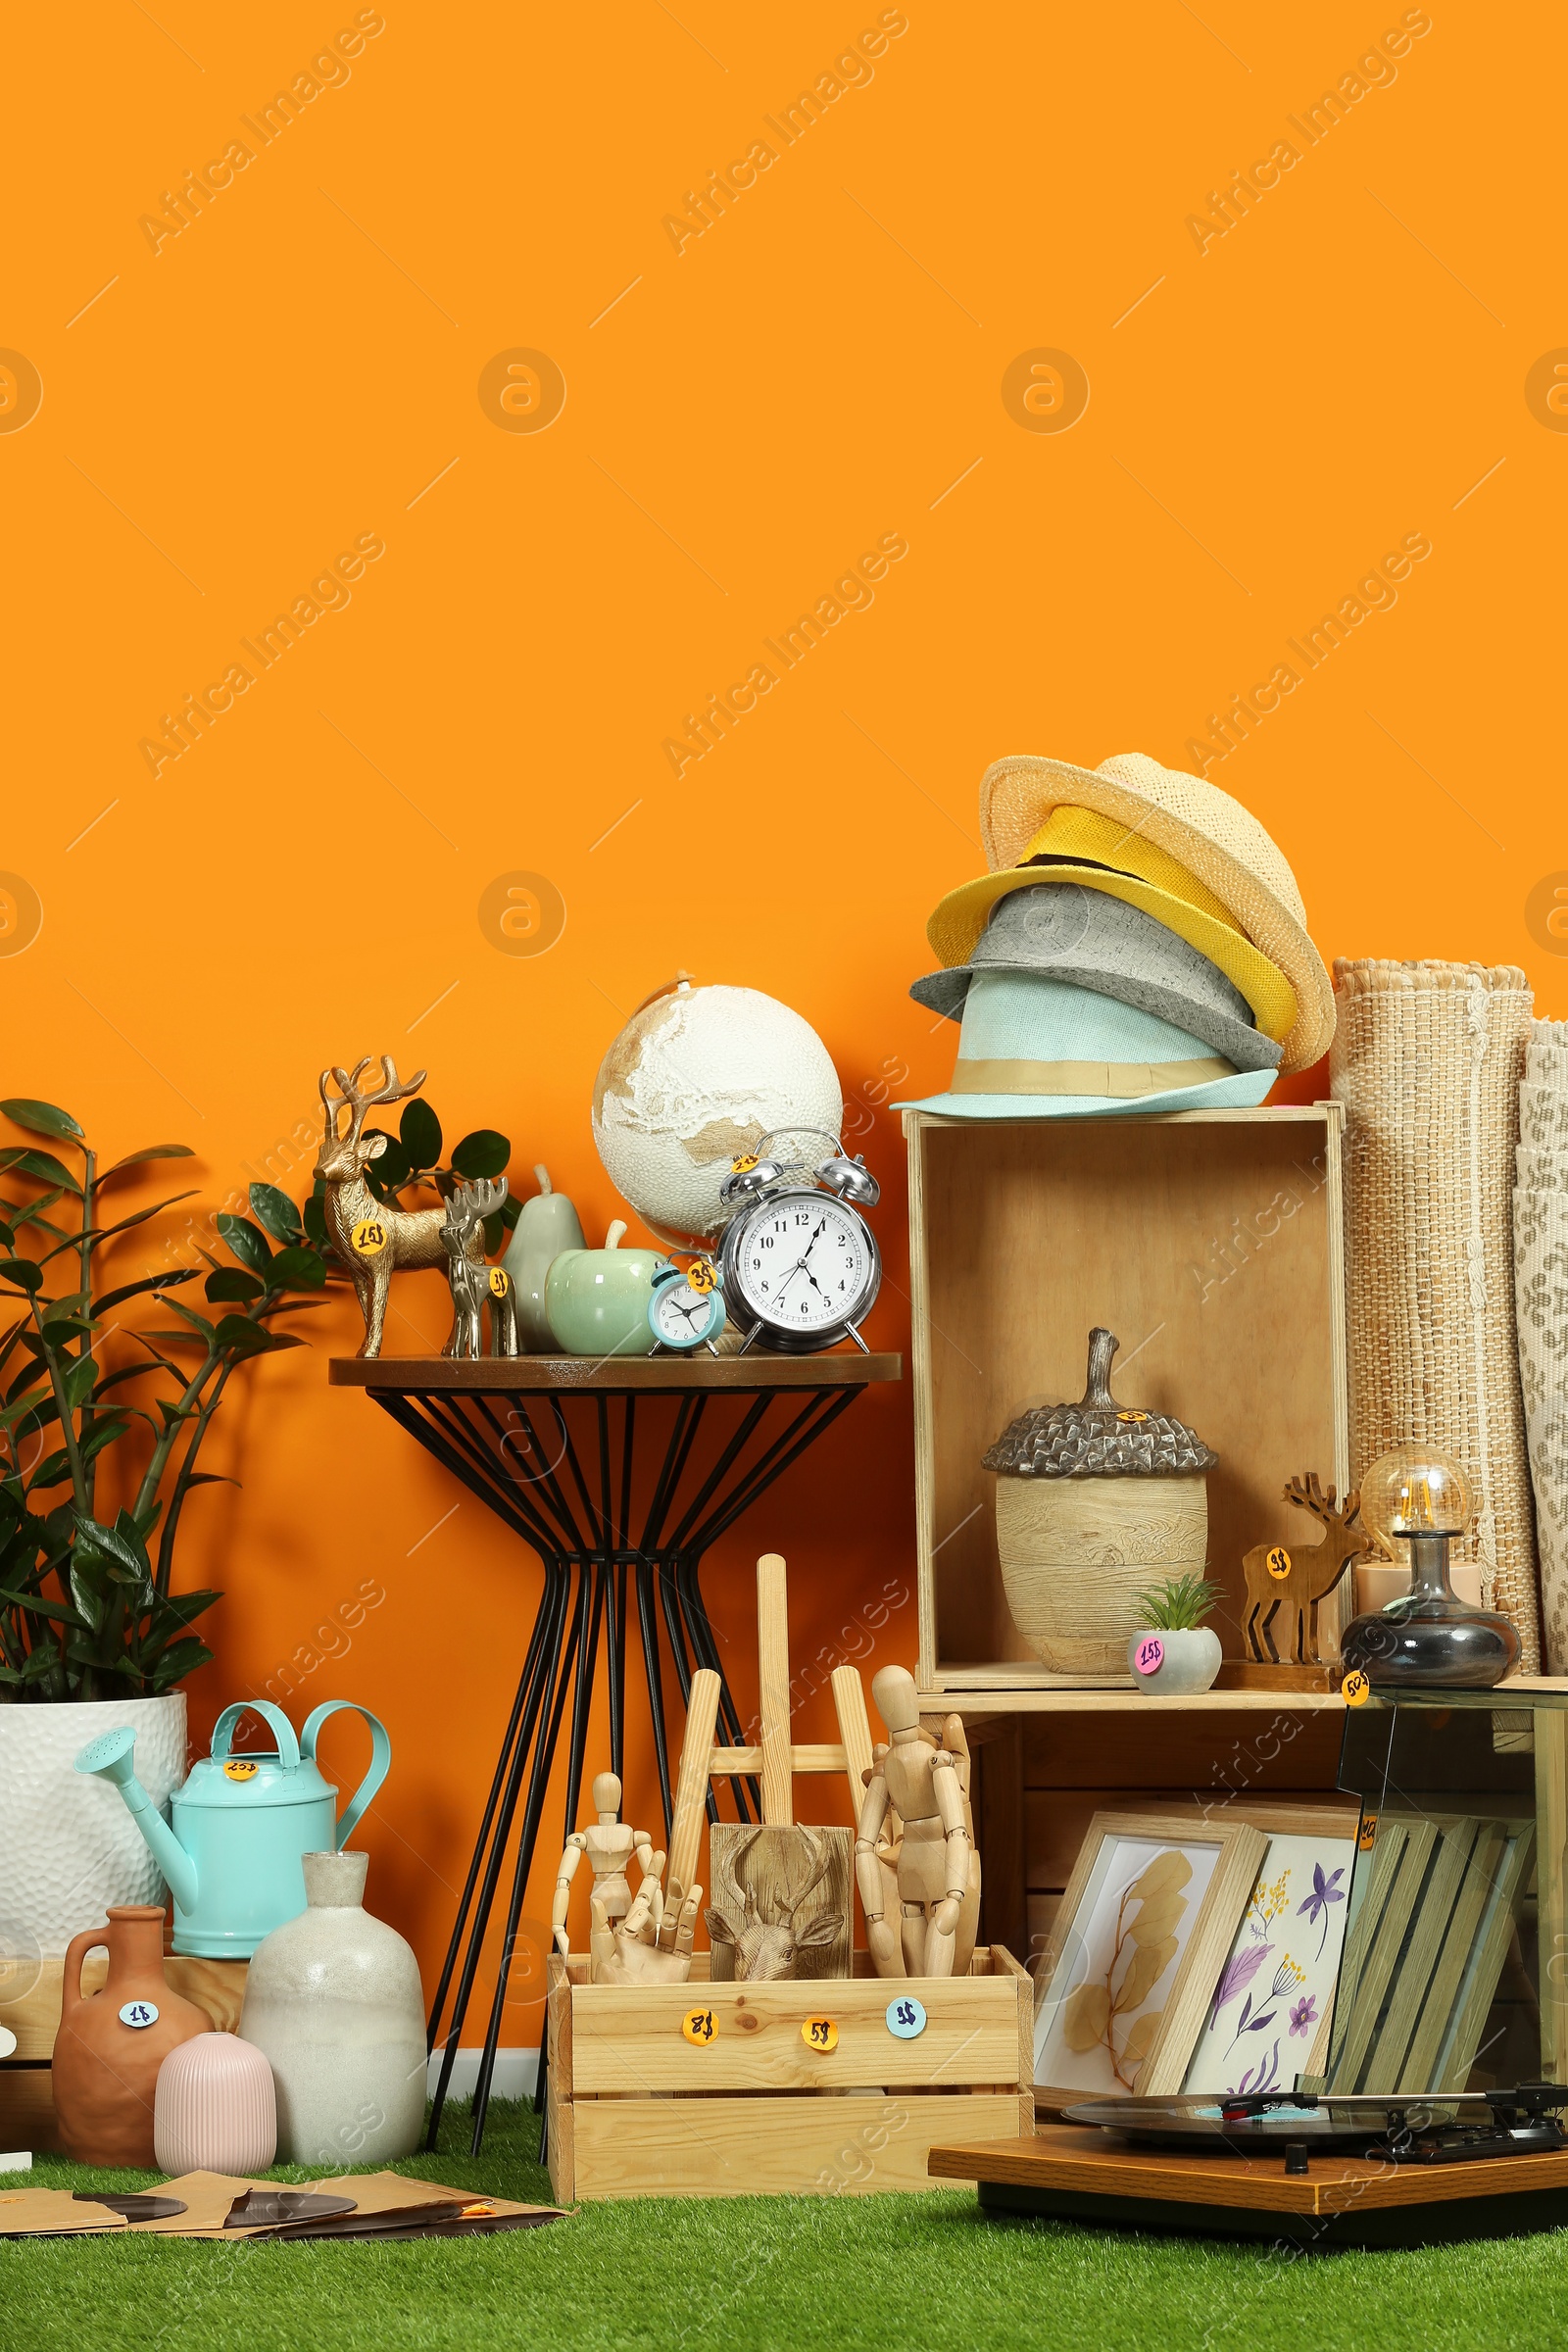 Photo of Many different items near orange wall in room. Garage sale